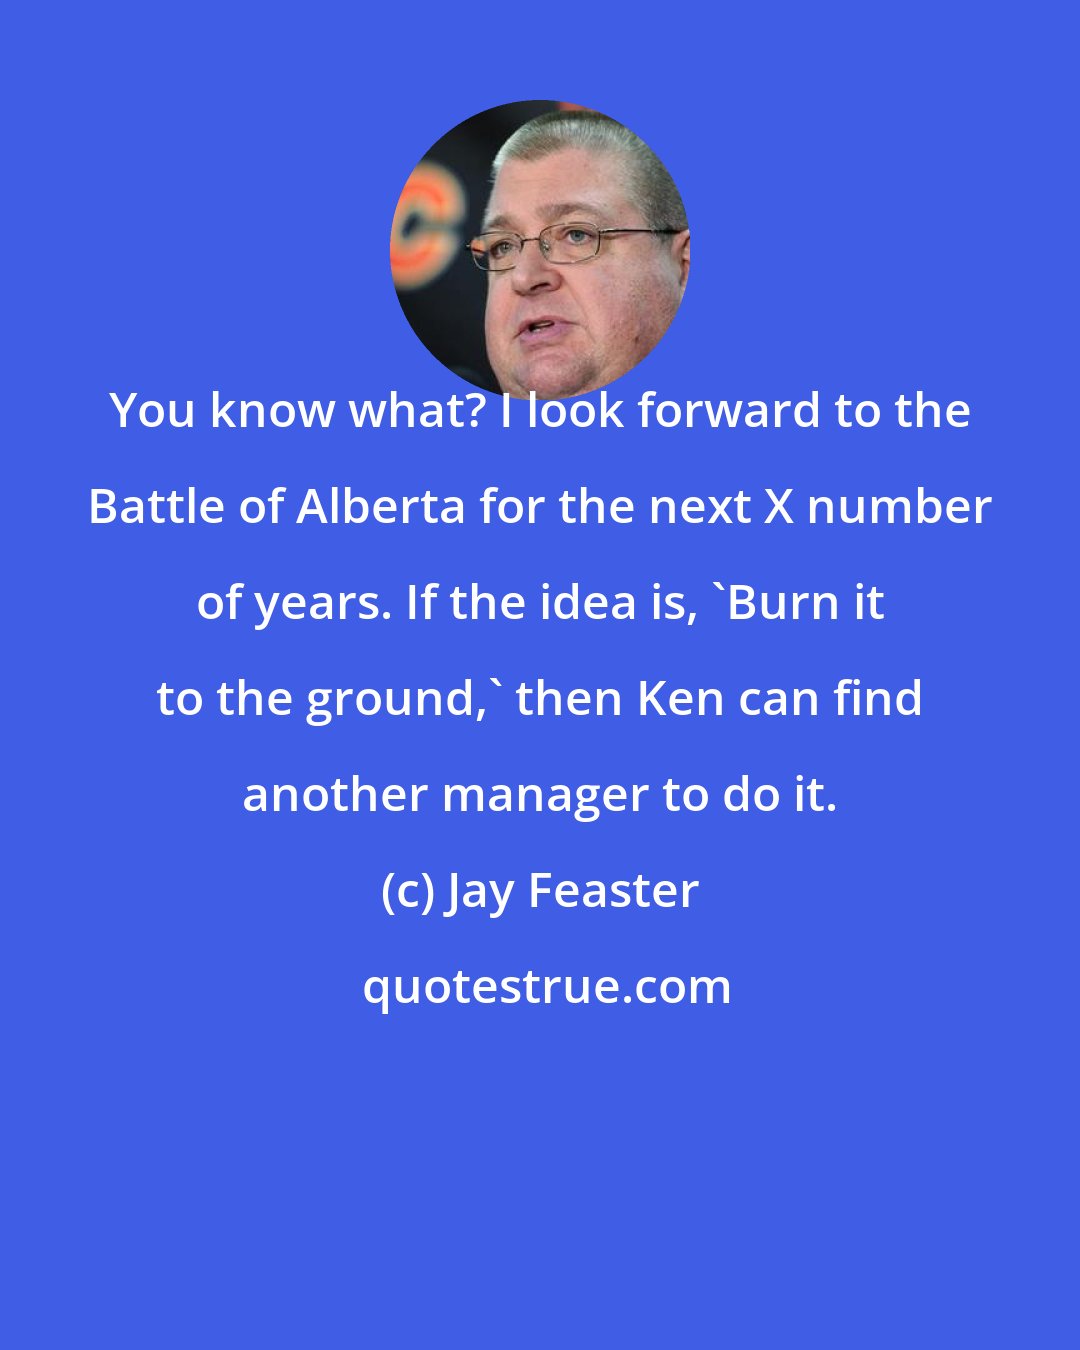 Jay Feaster: You know what? I look forward to the Battle of Alberta for the next X number of years. If the idea is, 'Burn it to the ground,' then Ken can find another manager to do it.